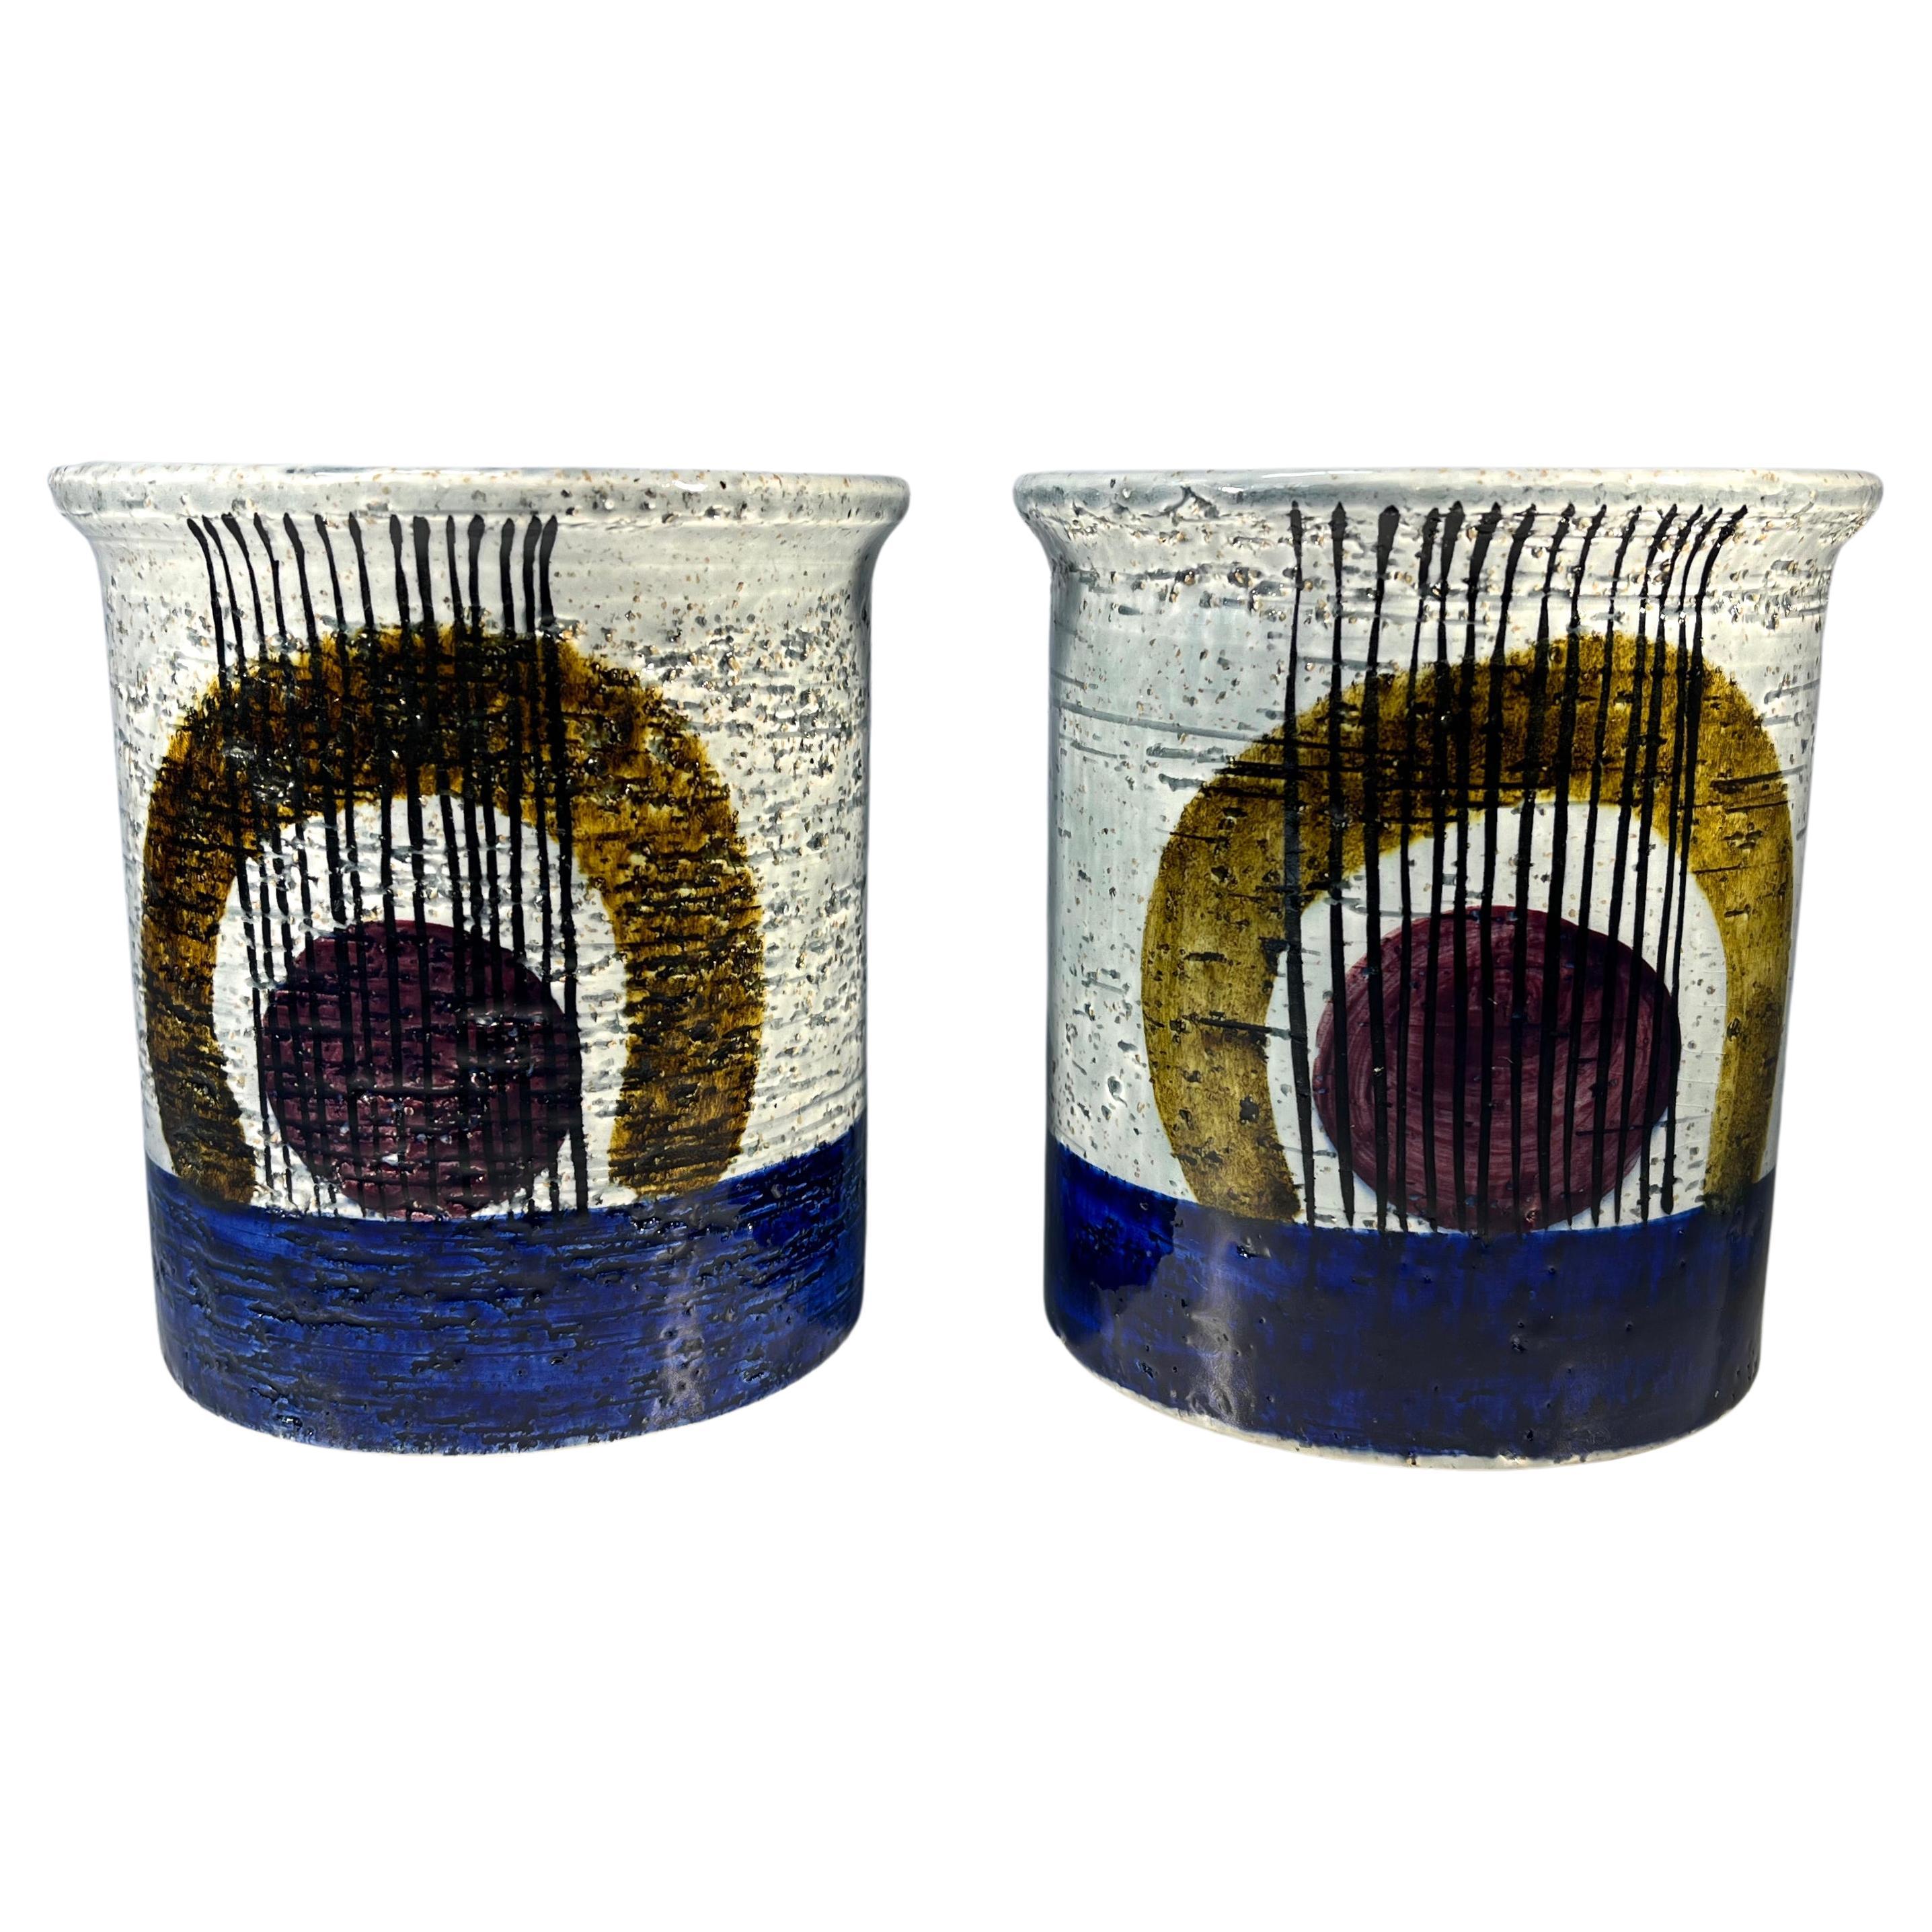 Pair Of 'Kurbits' Stoneware Vases By Olle Alberius For Rörstrand, Sweden For Sale